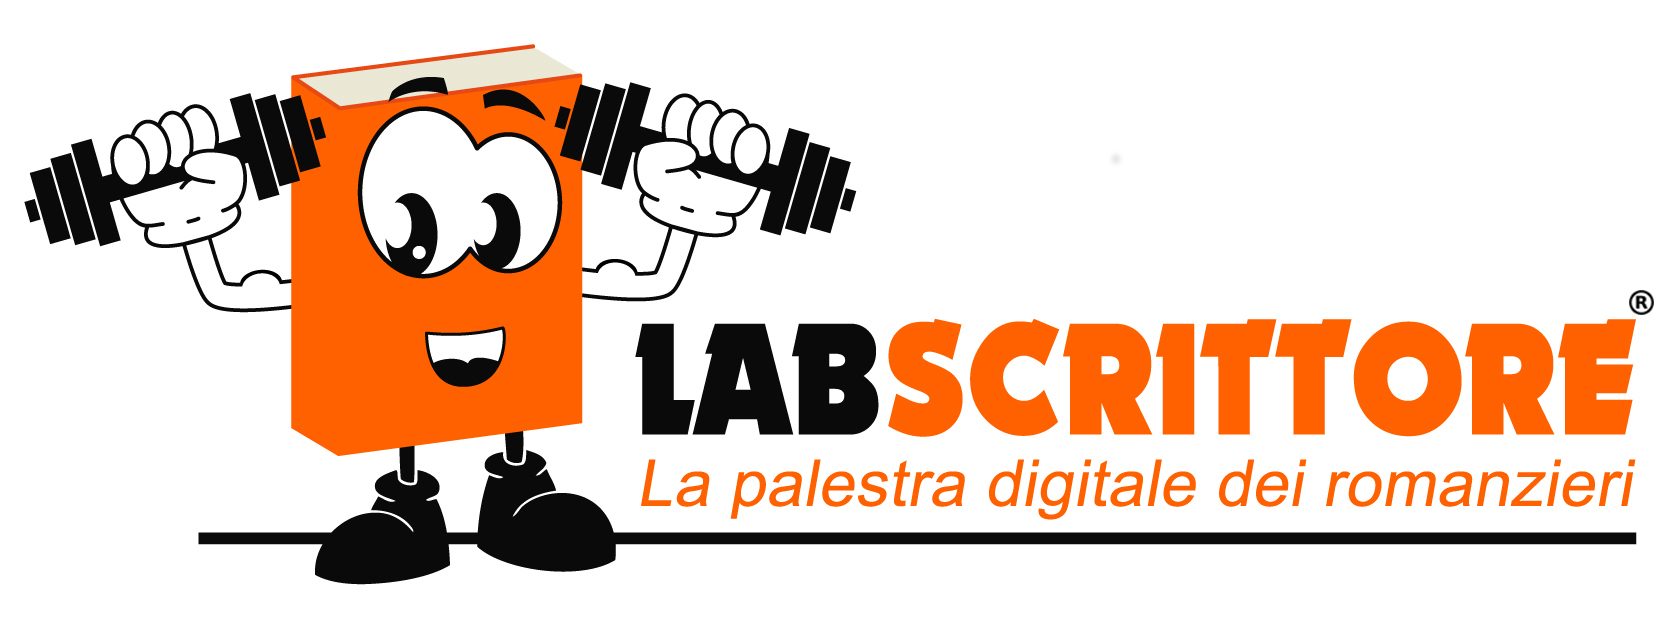 LabScrittore